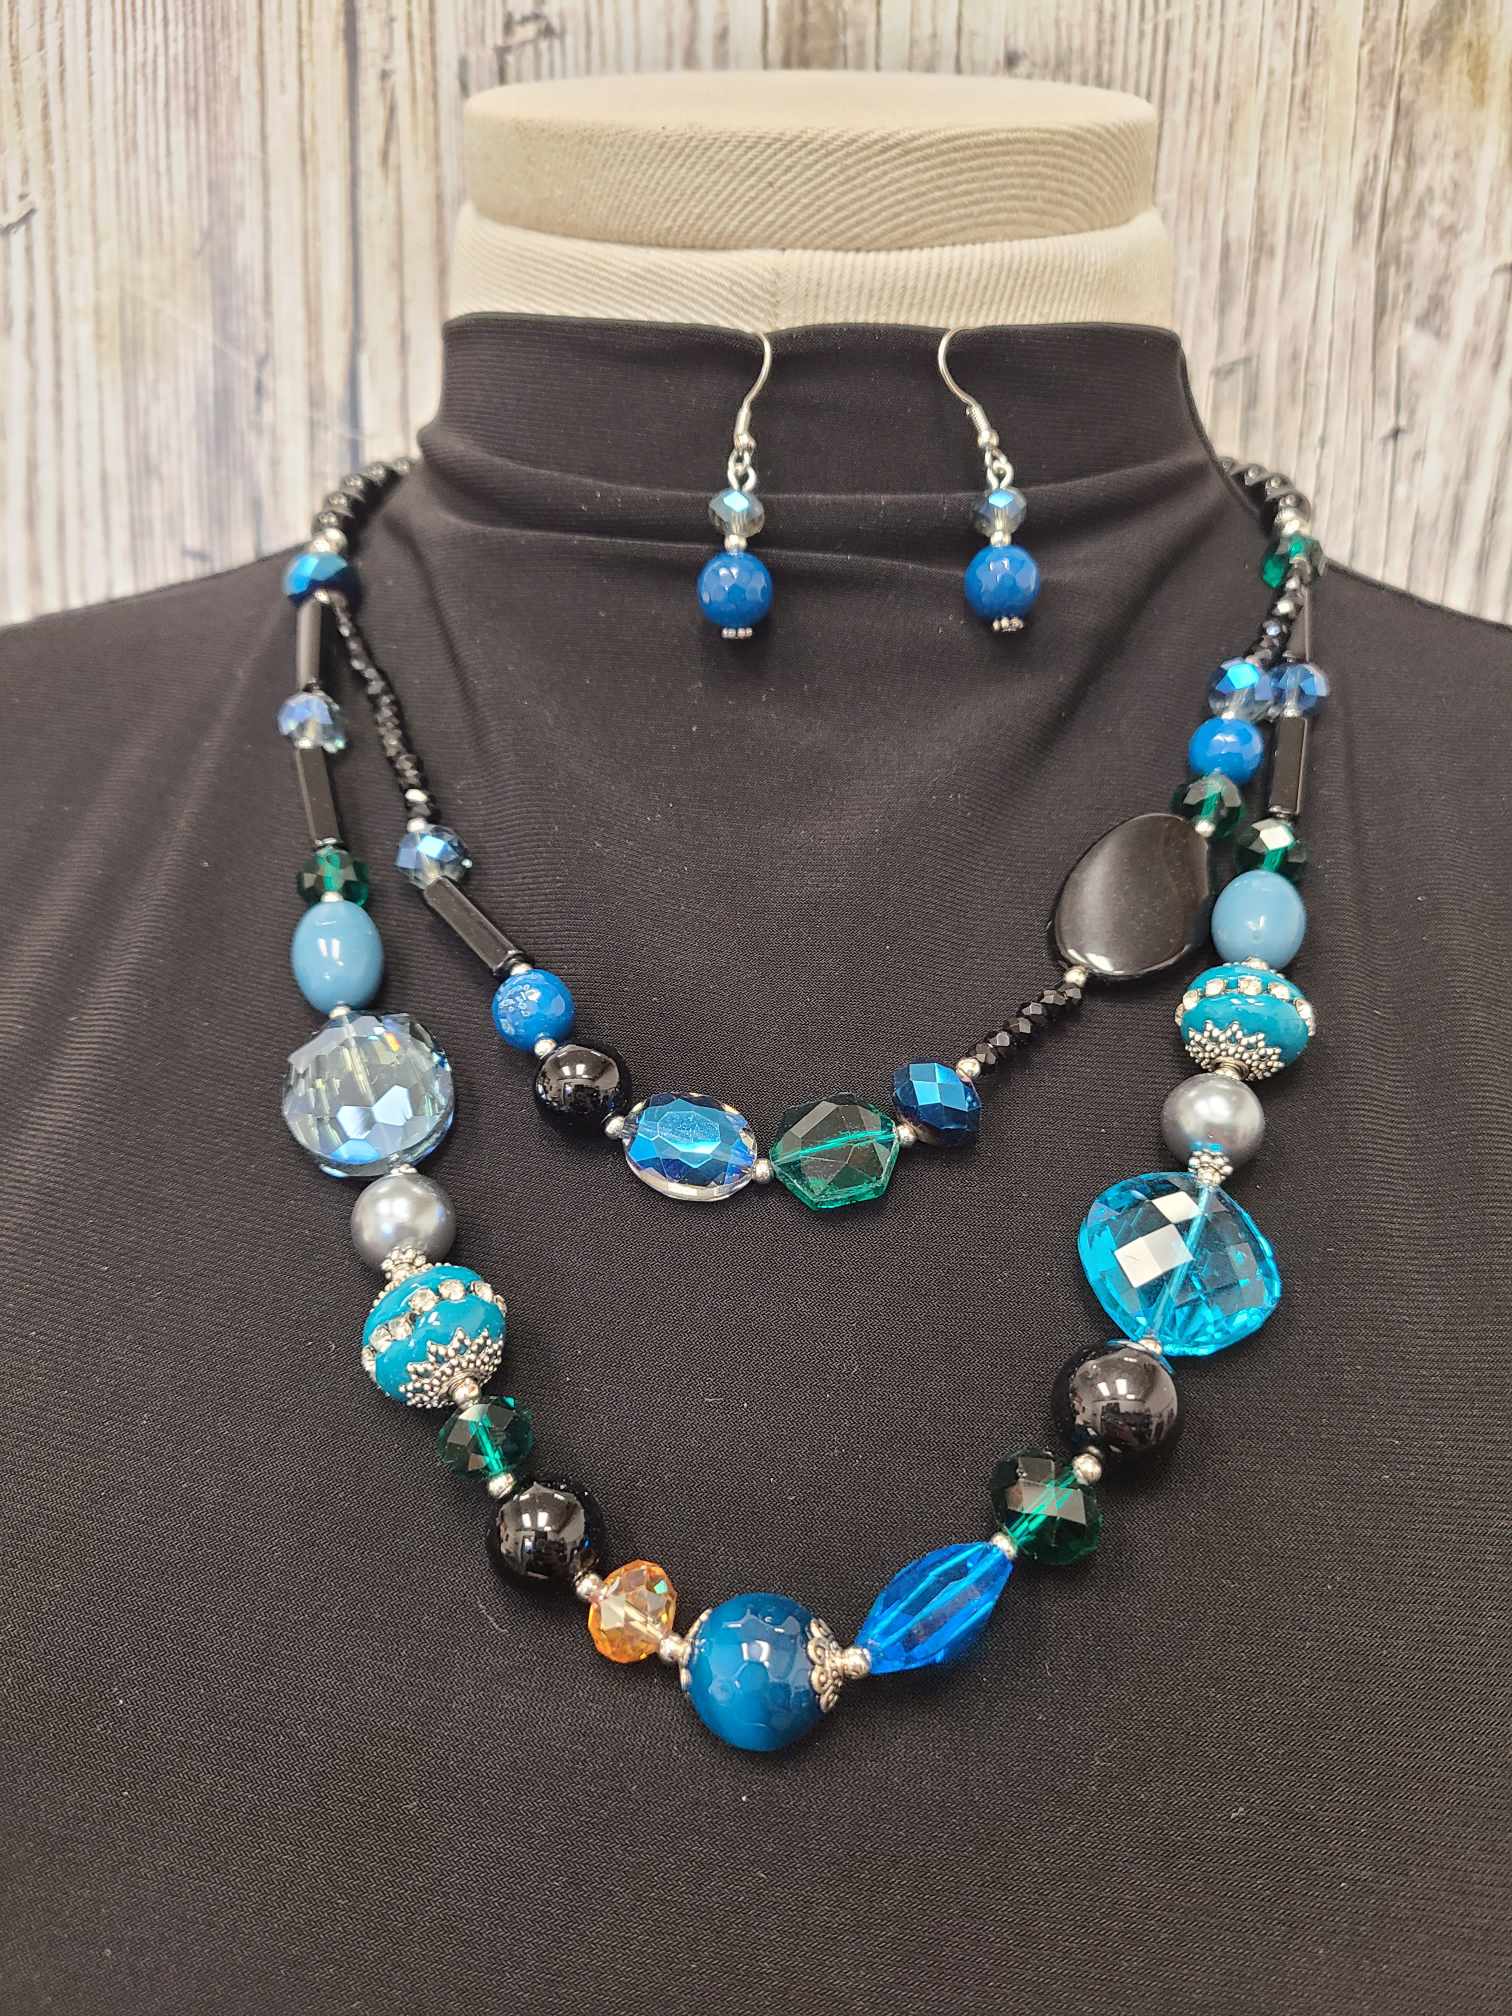 Blue Semi-Precious Stone Necklace with Matching Earrings